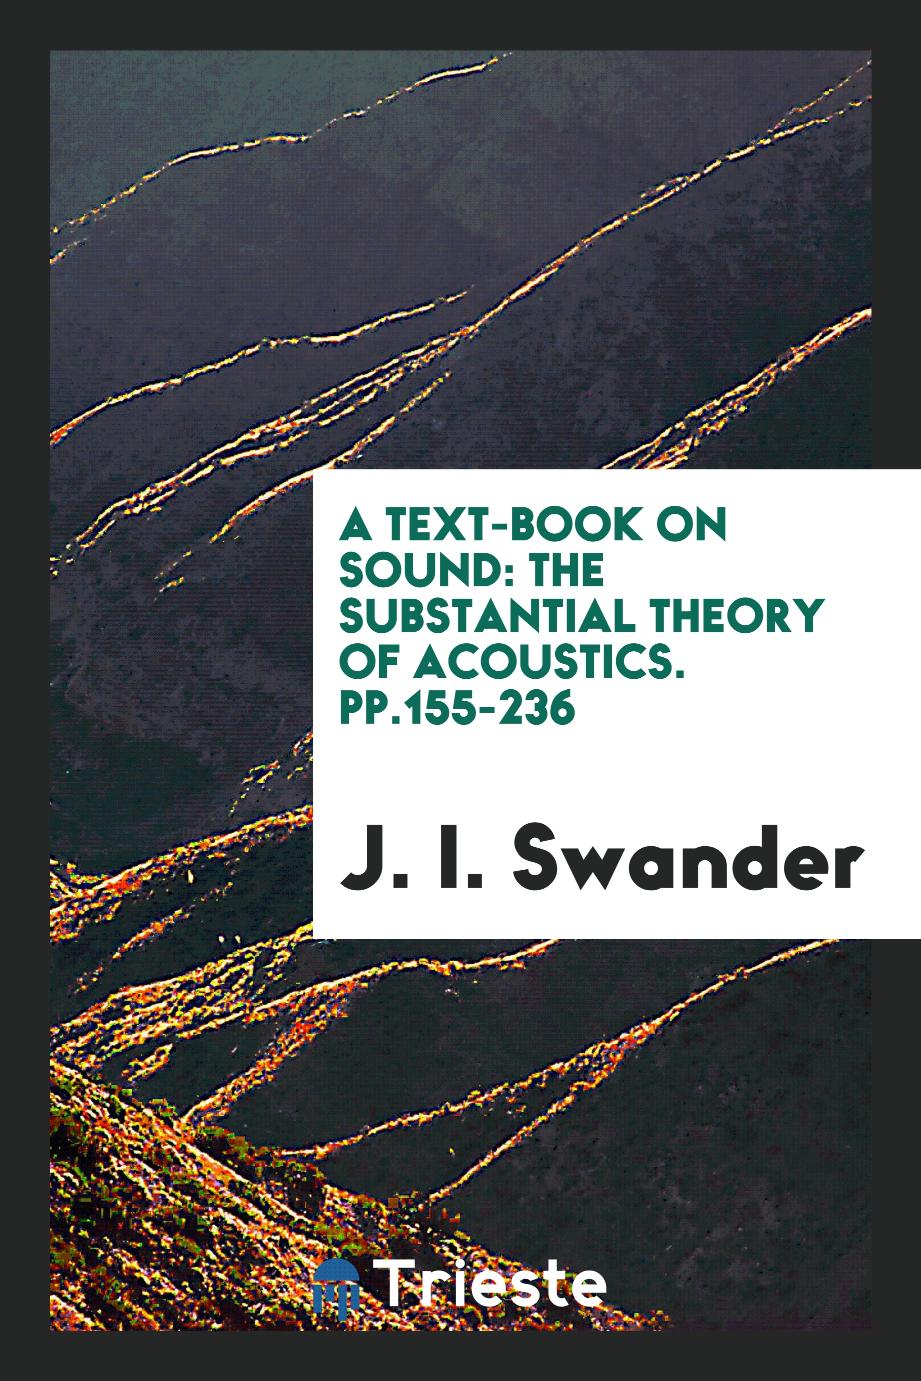 A Text-Book on Sound: The Substantial Theory of Acoustics. pp.155-236